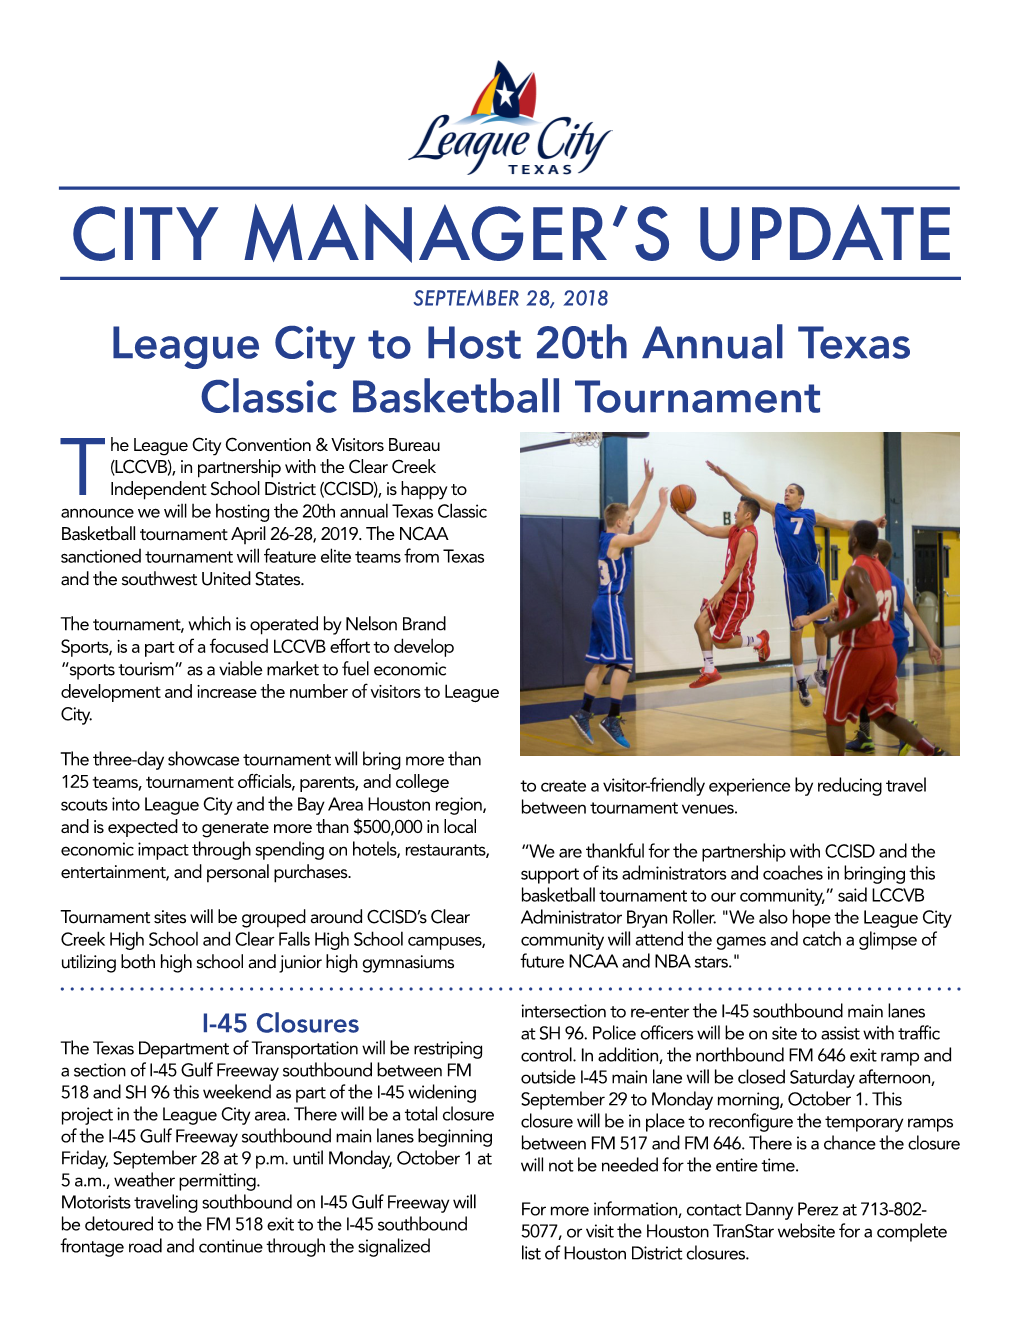 City Manager's Update